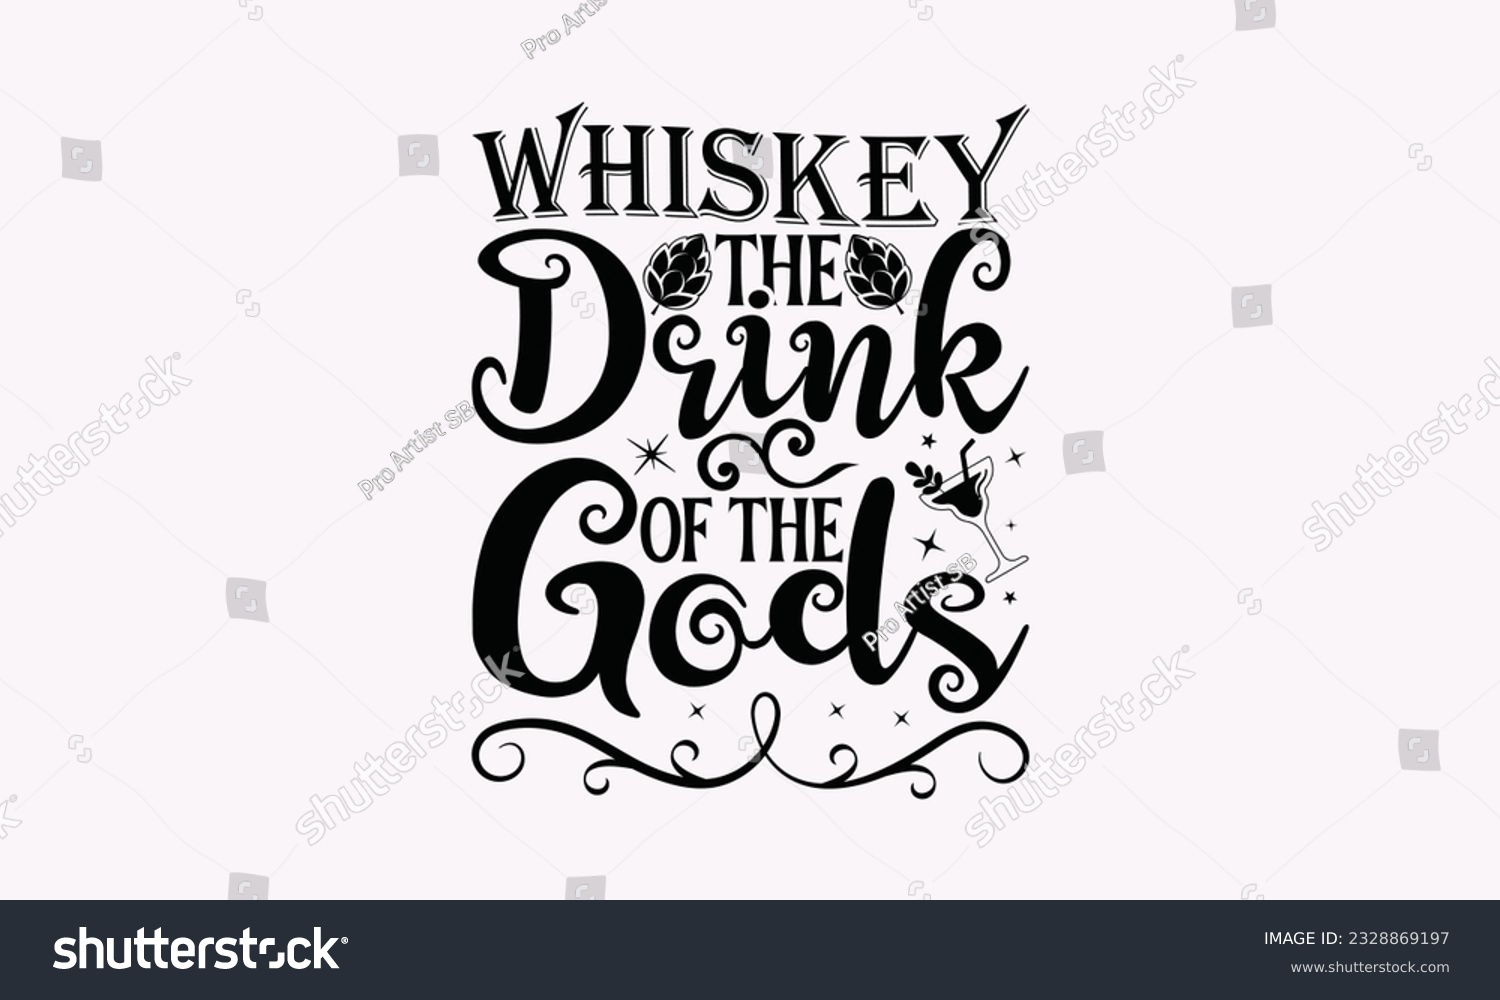 SVG of Whiskey The Drink Of The Gods - Alcohol SVG Design, Cheer Quotes, Hand drawn lettering phrase, Isolated on white background. svg